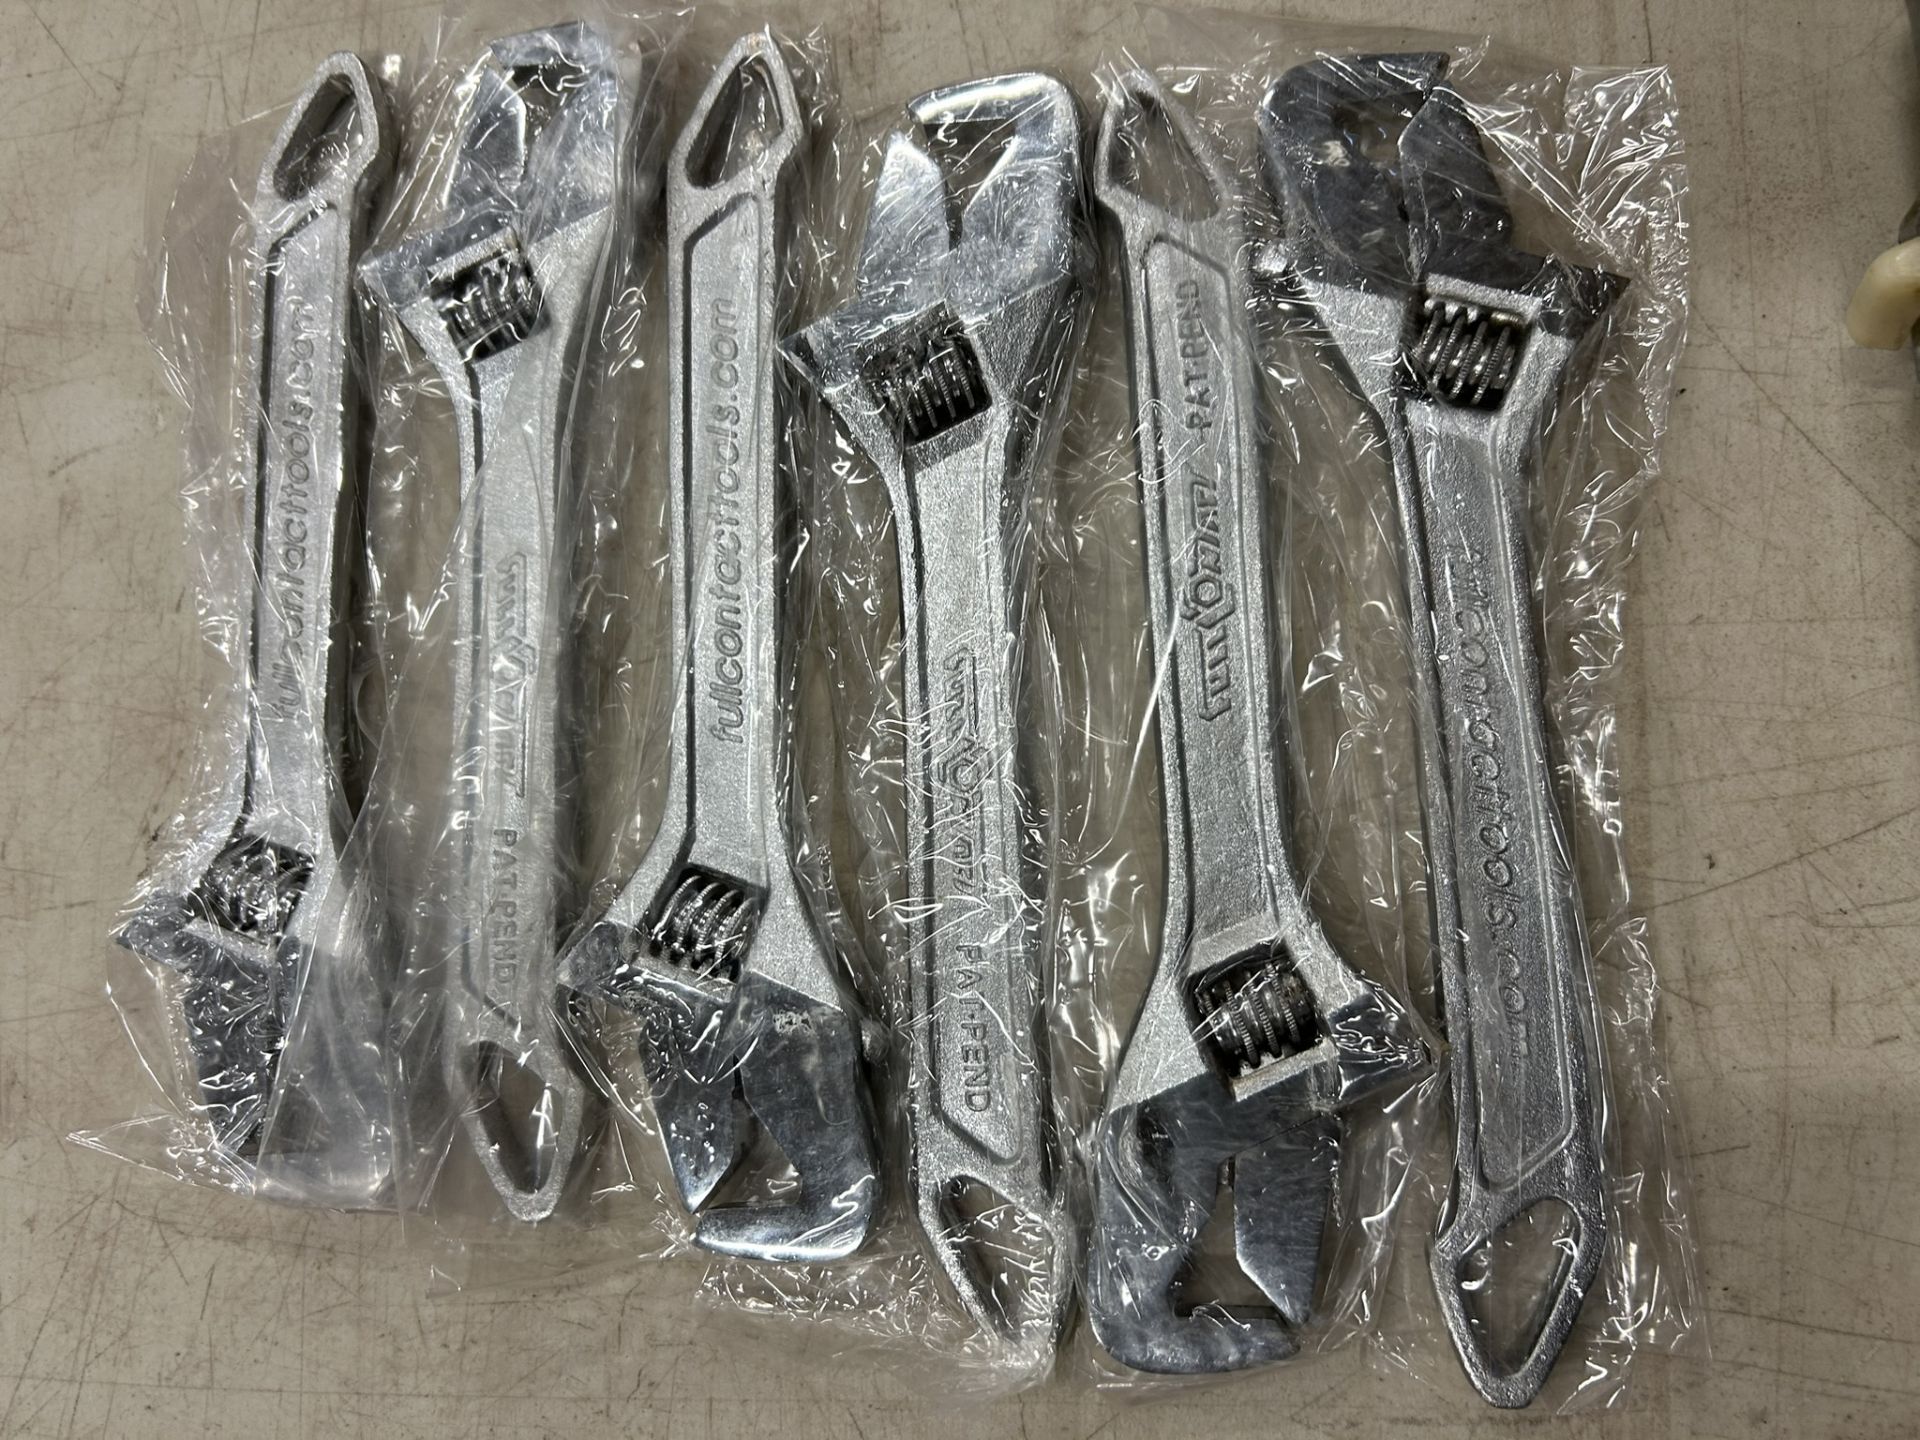 NEW BOX END RATCHET WRENCH SET 3/8"-15/16" & 6-NEW FULL CONTACT ADJUSTABLE WRENCHES - Image 4 of 4